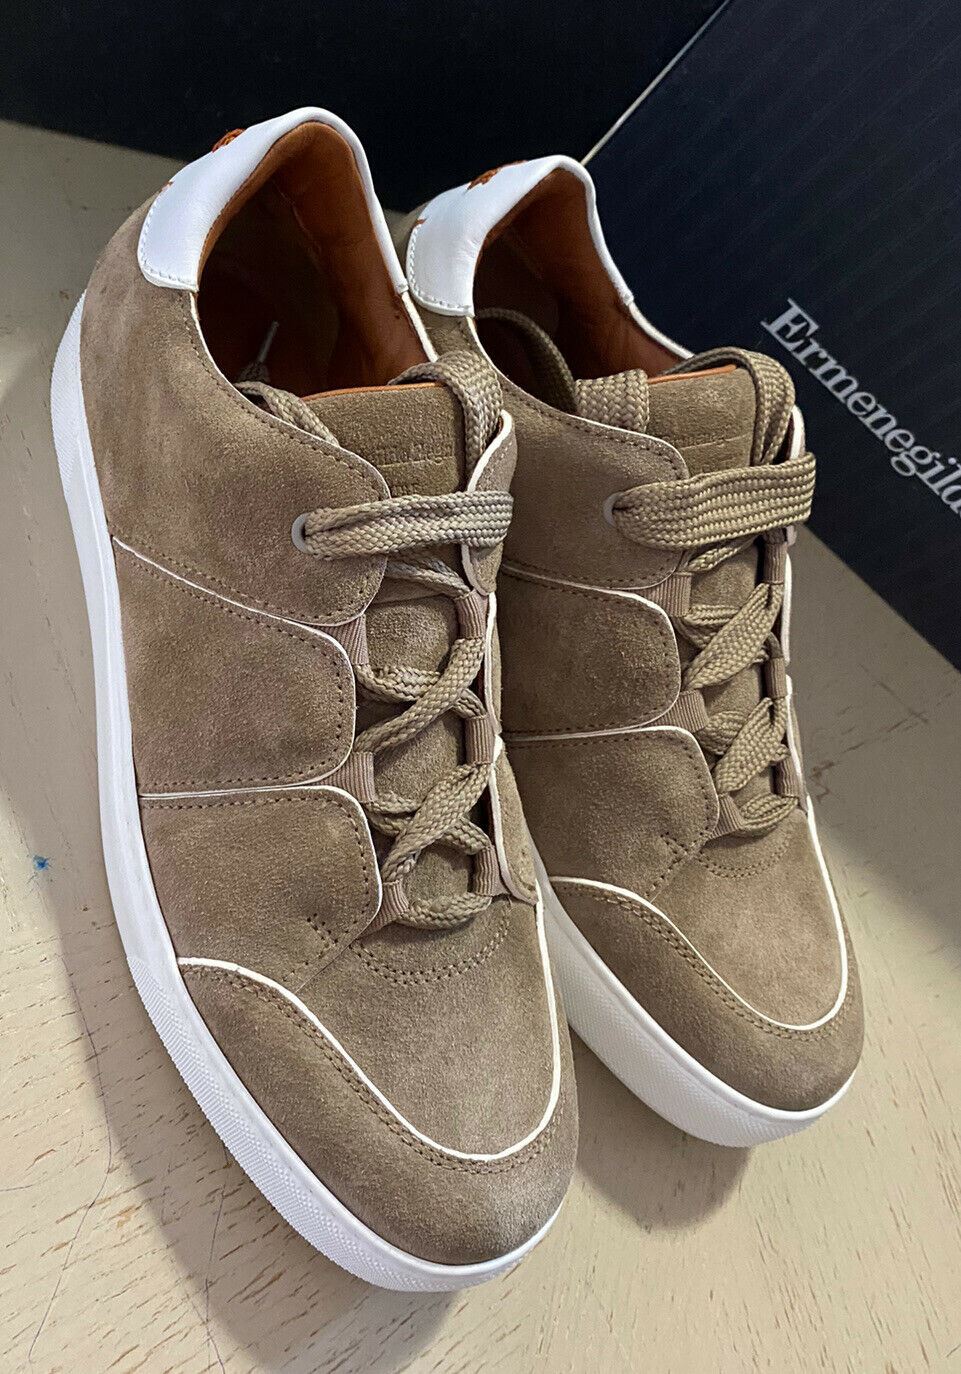 New $850 Ermenegildo Zegna Couture Suede/Leather Sneakers Shoes LT Brown 9 US